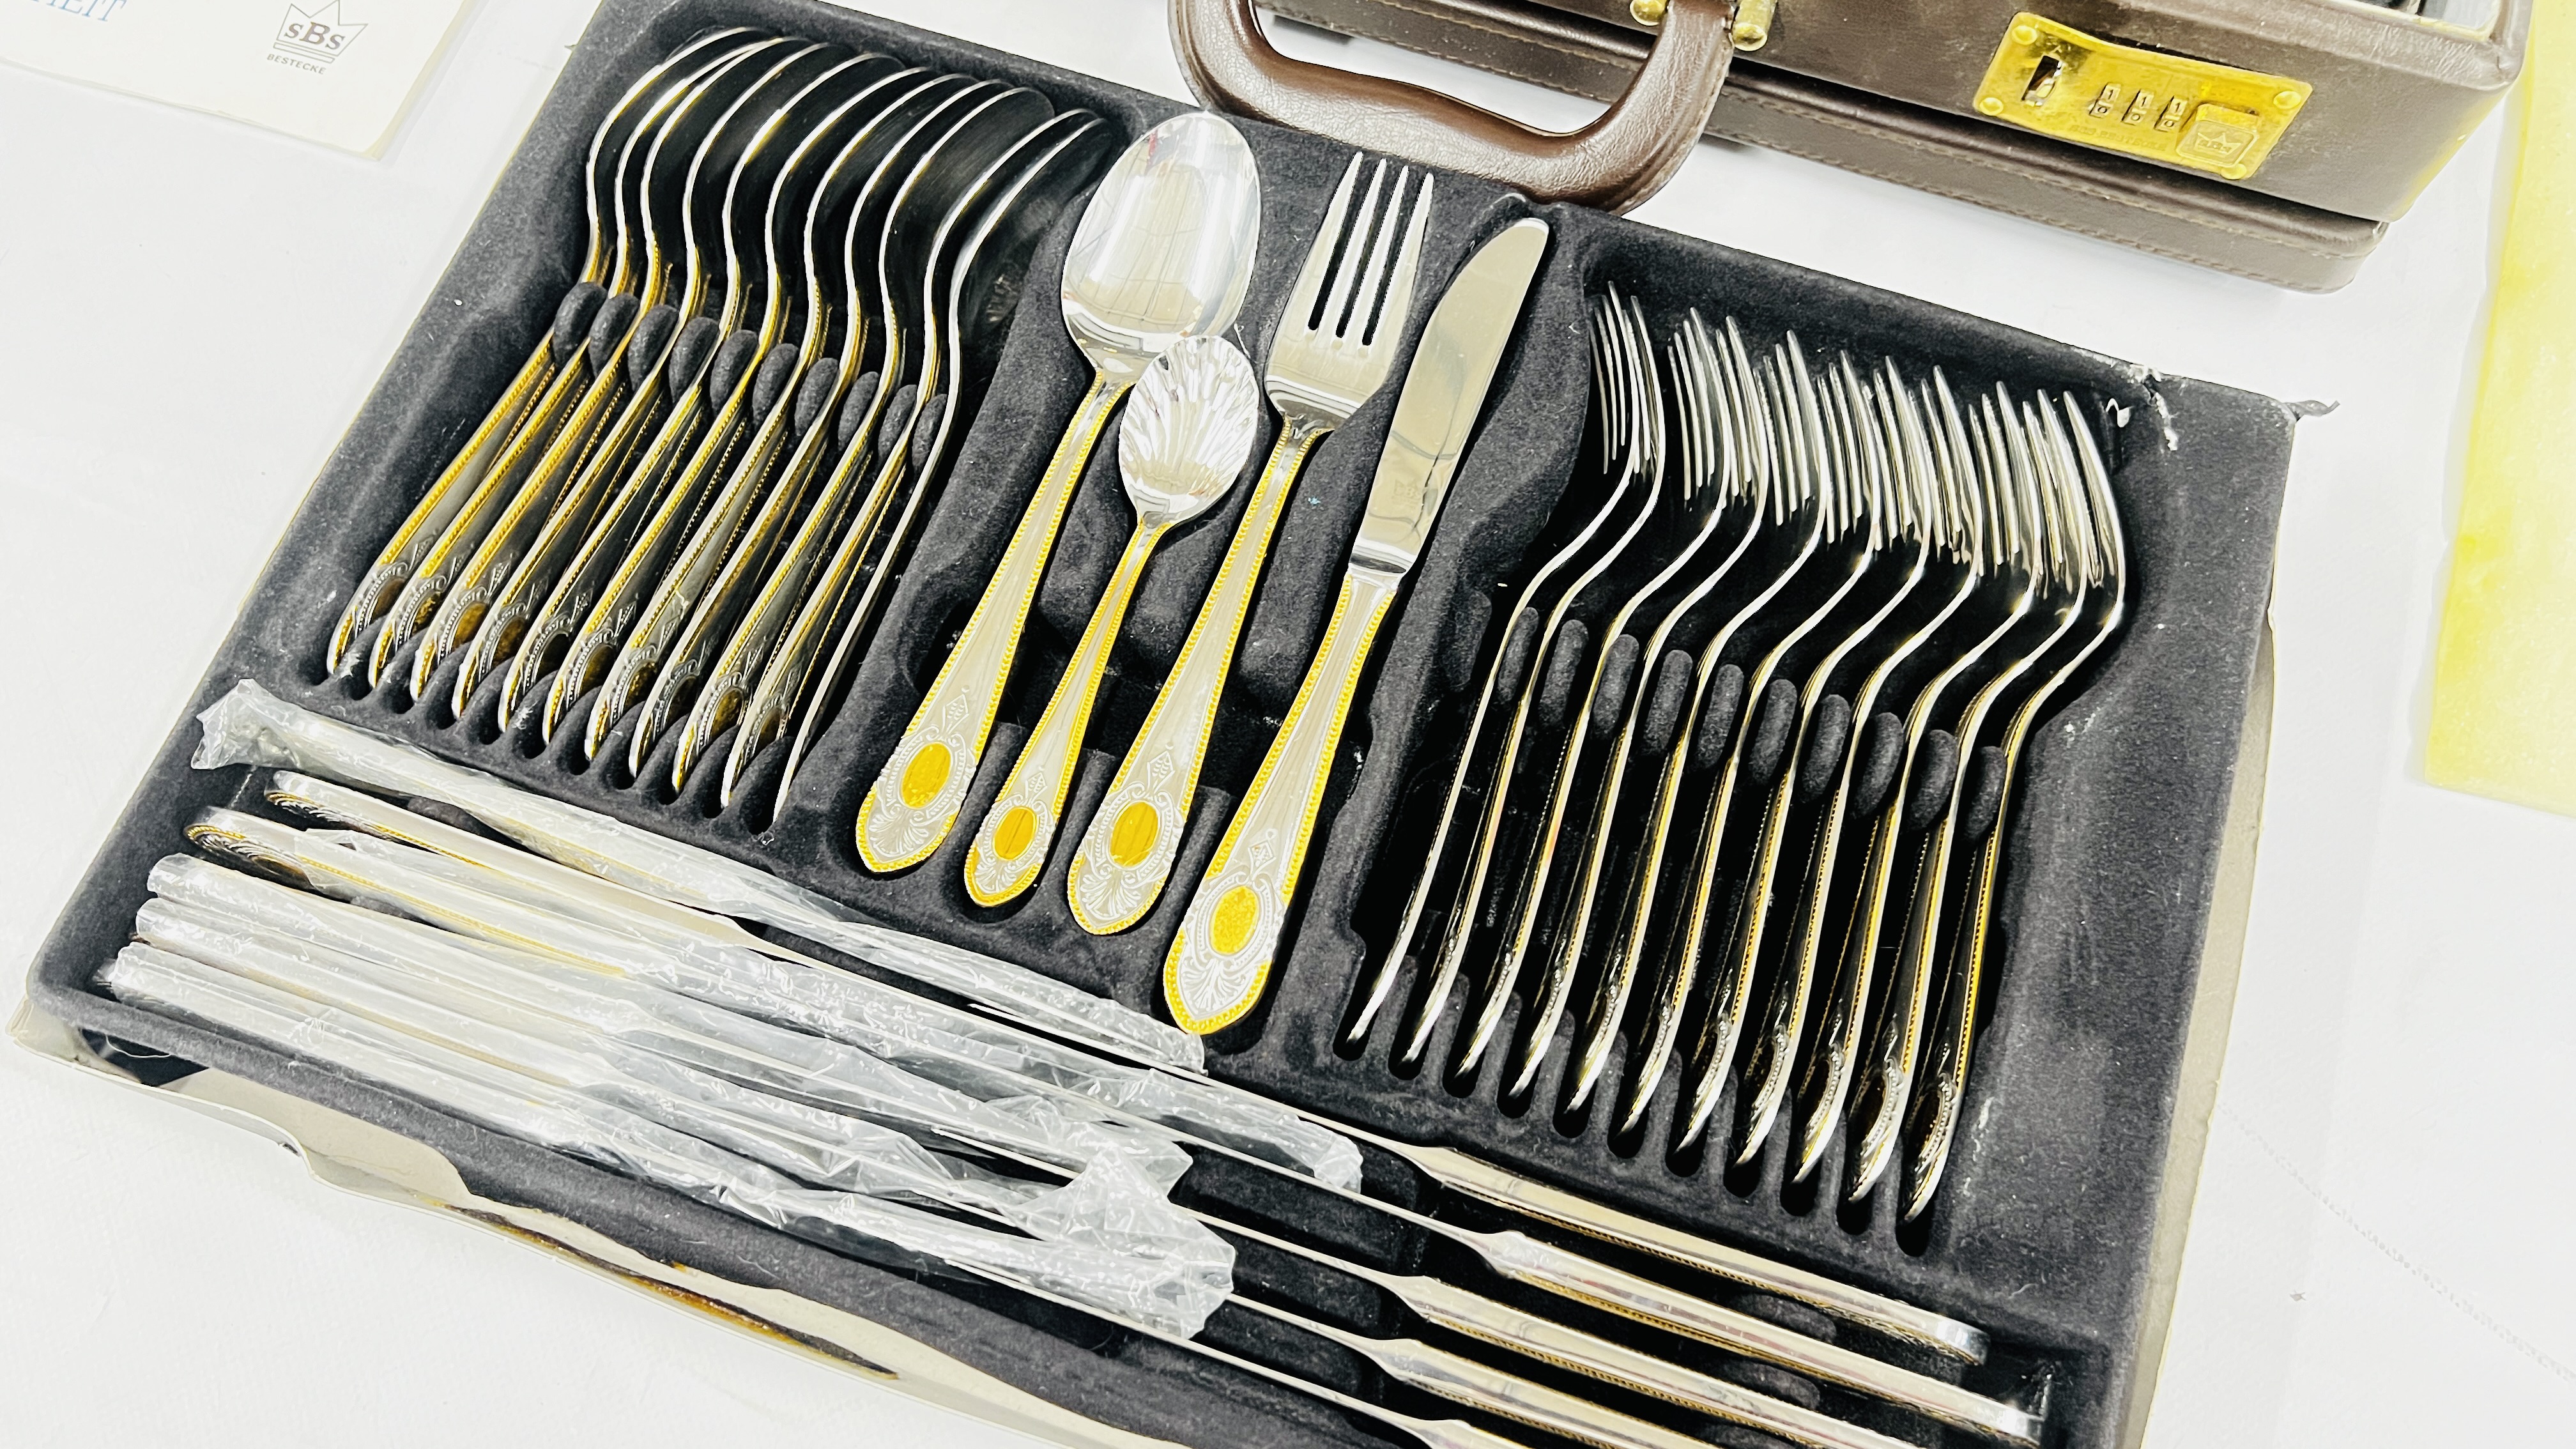 A CASED CANTEEN OF SBS SOLINGEN CUTLERY (12 PLACE SETTING). - Image 3 of 8